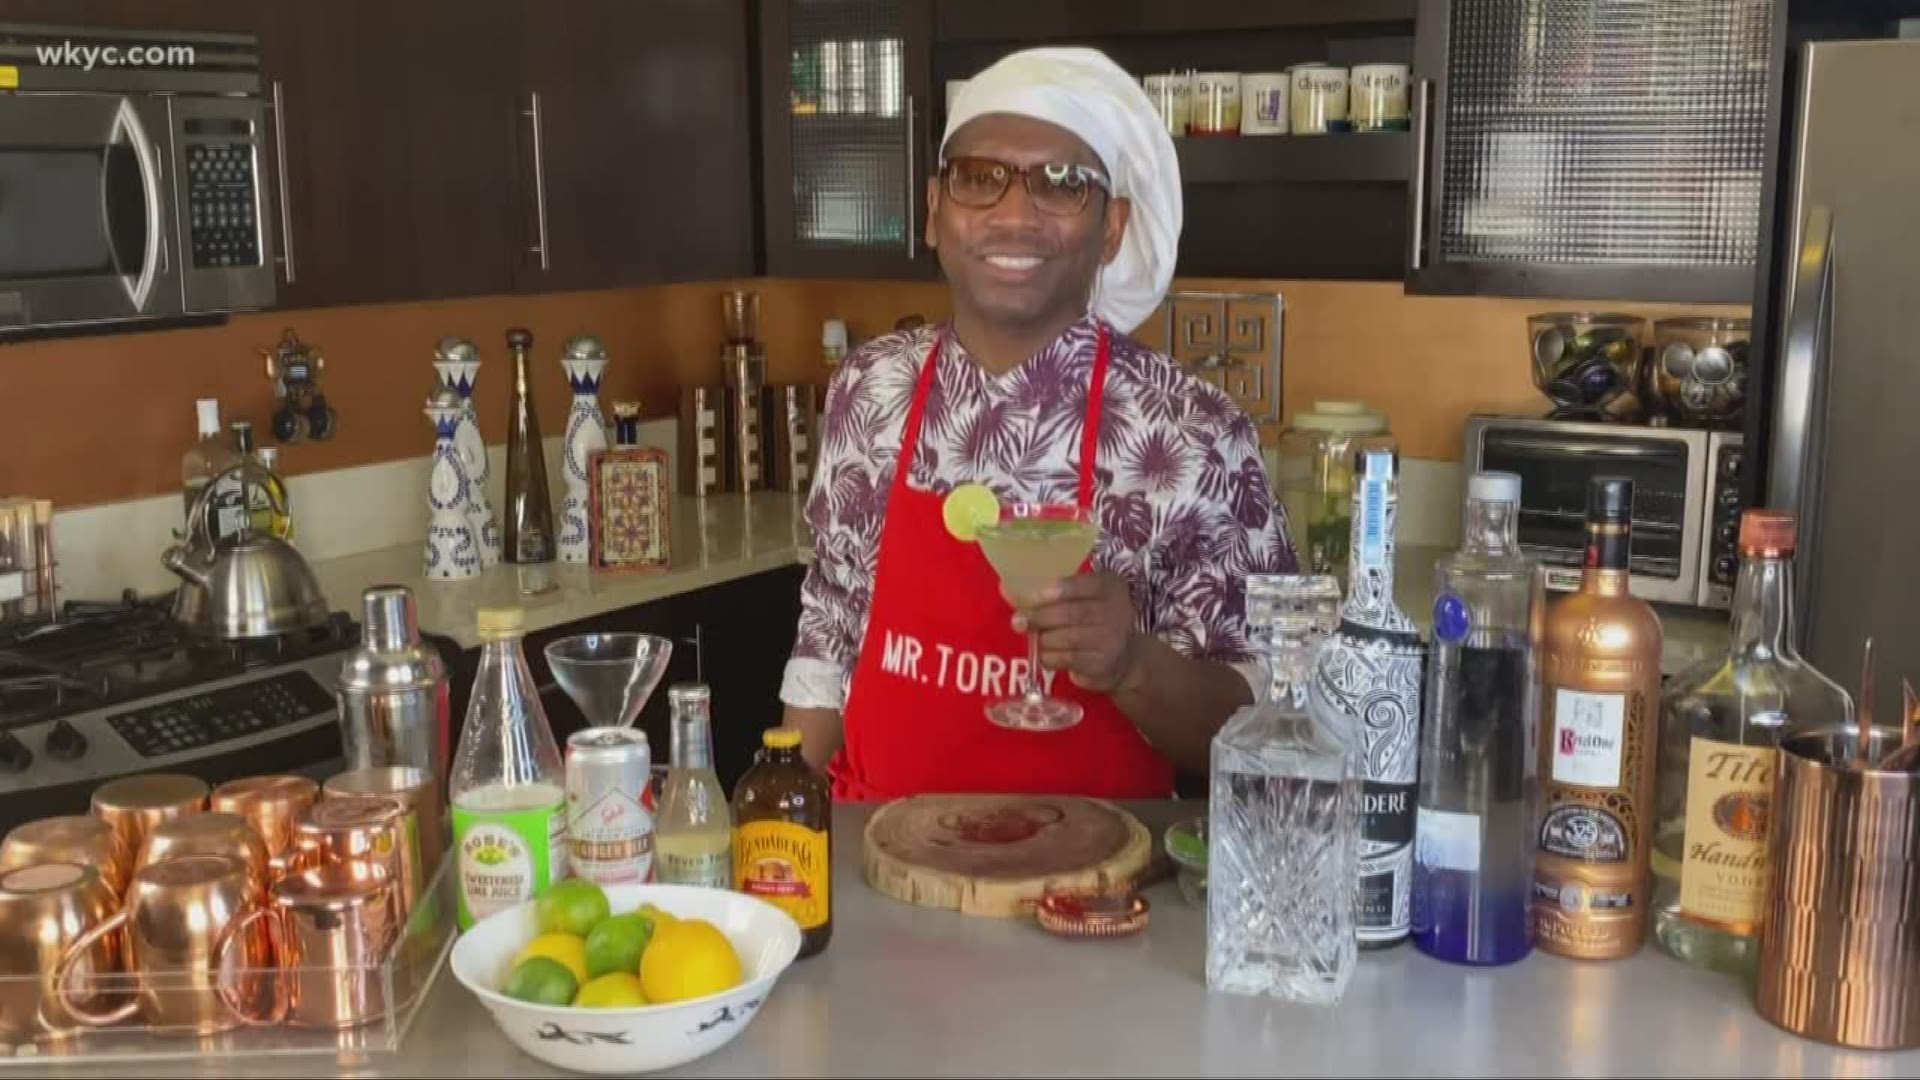 Grab your martini glasses! Comedian Guy Torry shares his recipe on how to make a 'Quarantini' -- the perfect drink while stuck at home.